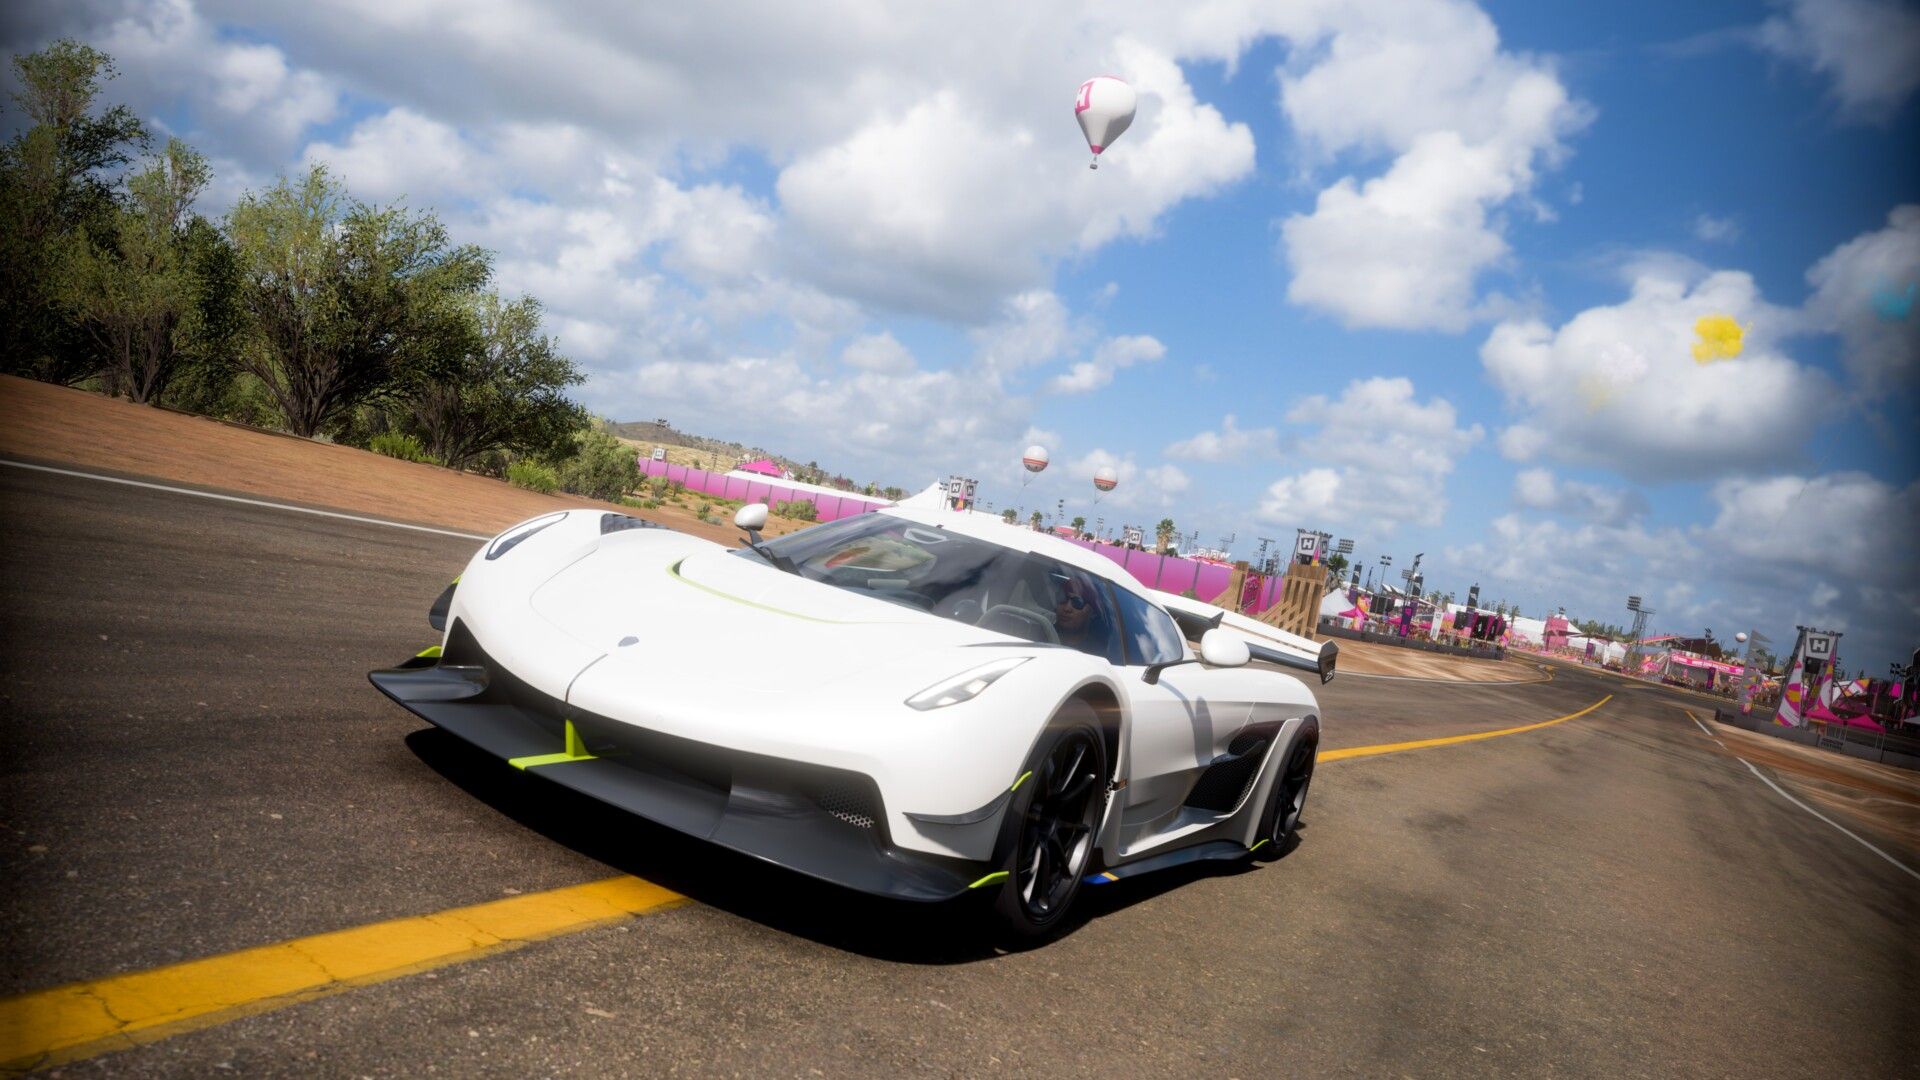 The 22 Fastest Cars In Forza Horizon 5